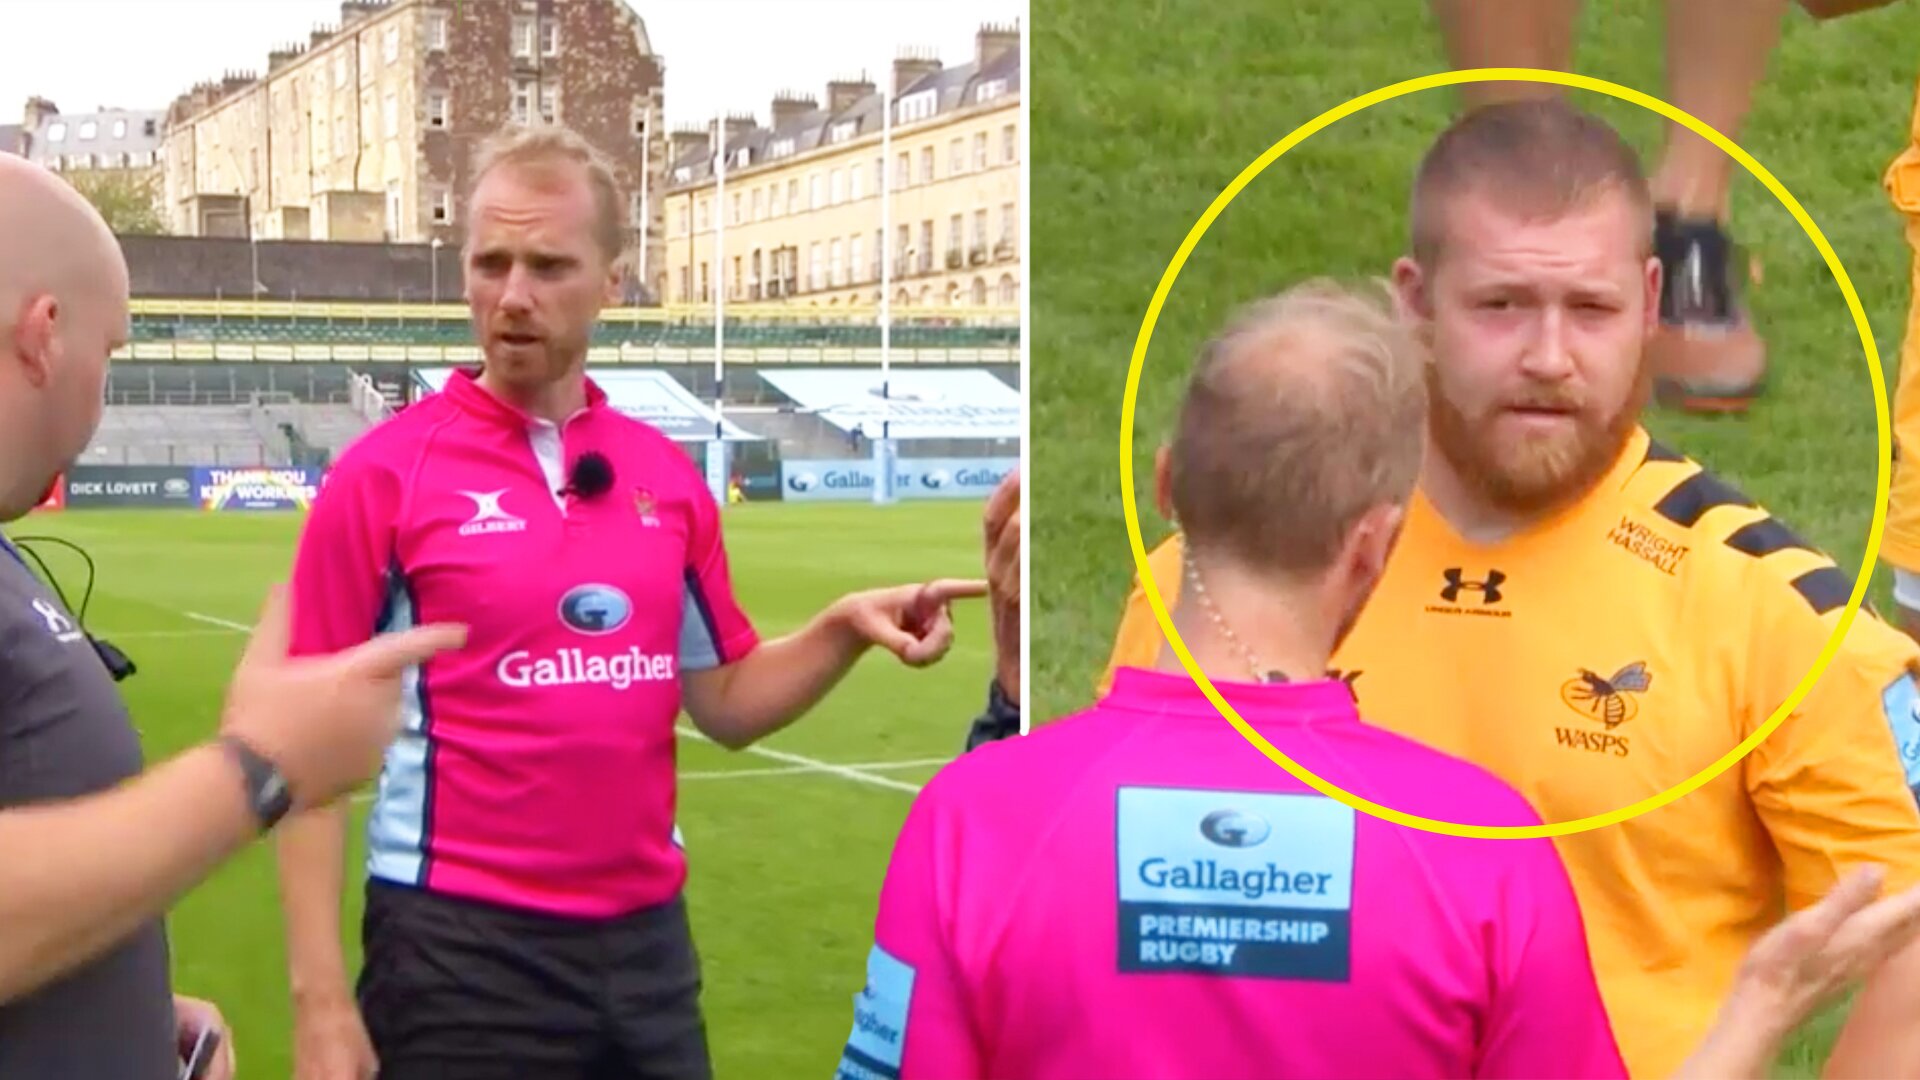 Wayne Barnes lauded for his handling of bizarre episode in today's Premiership rugby clash